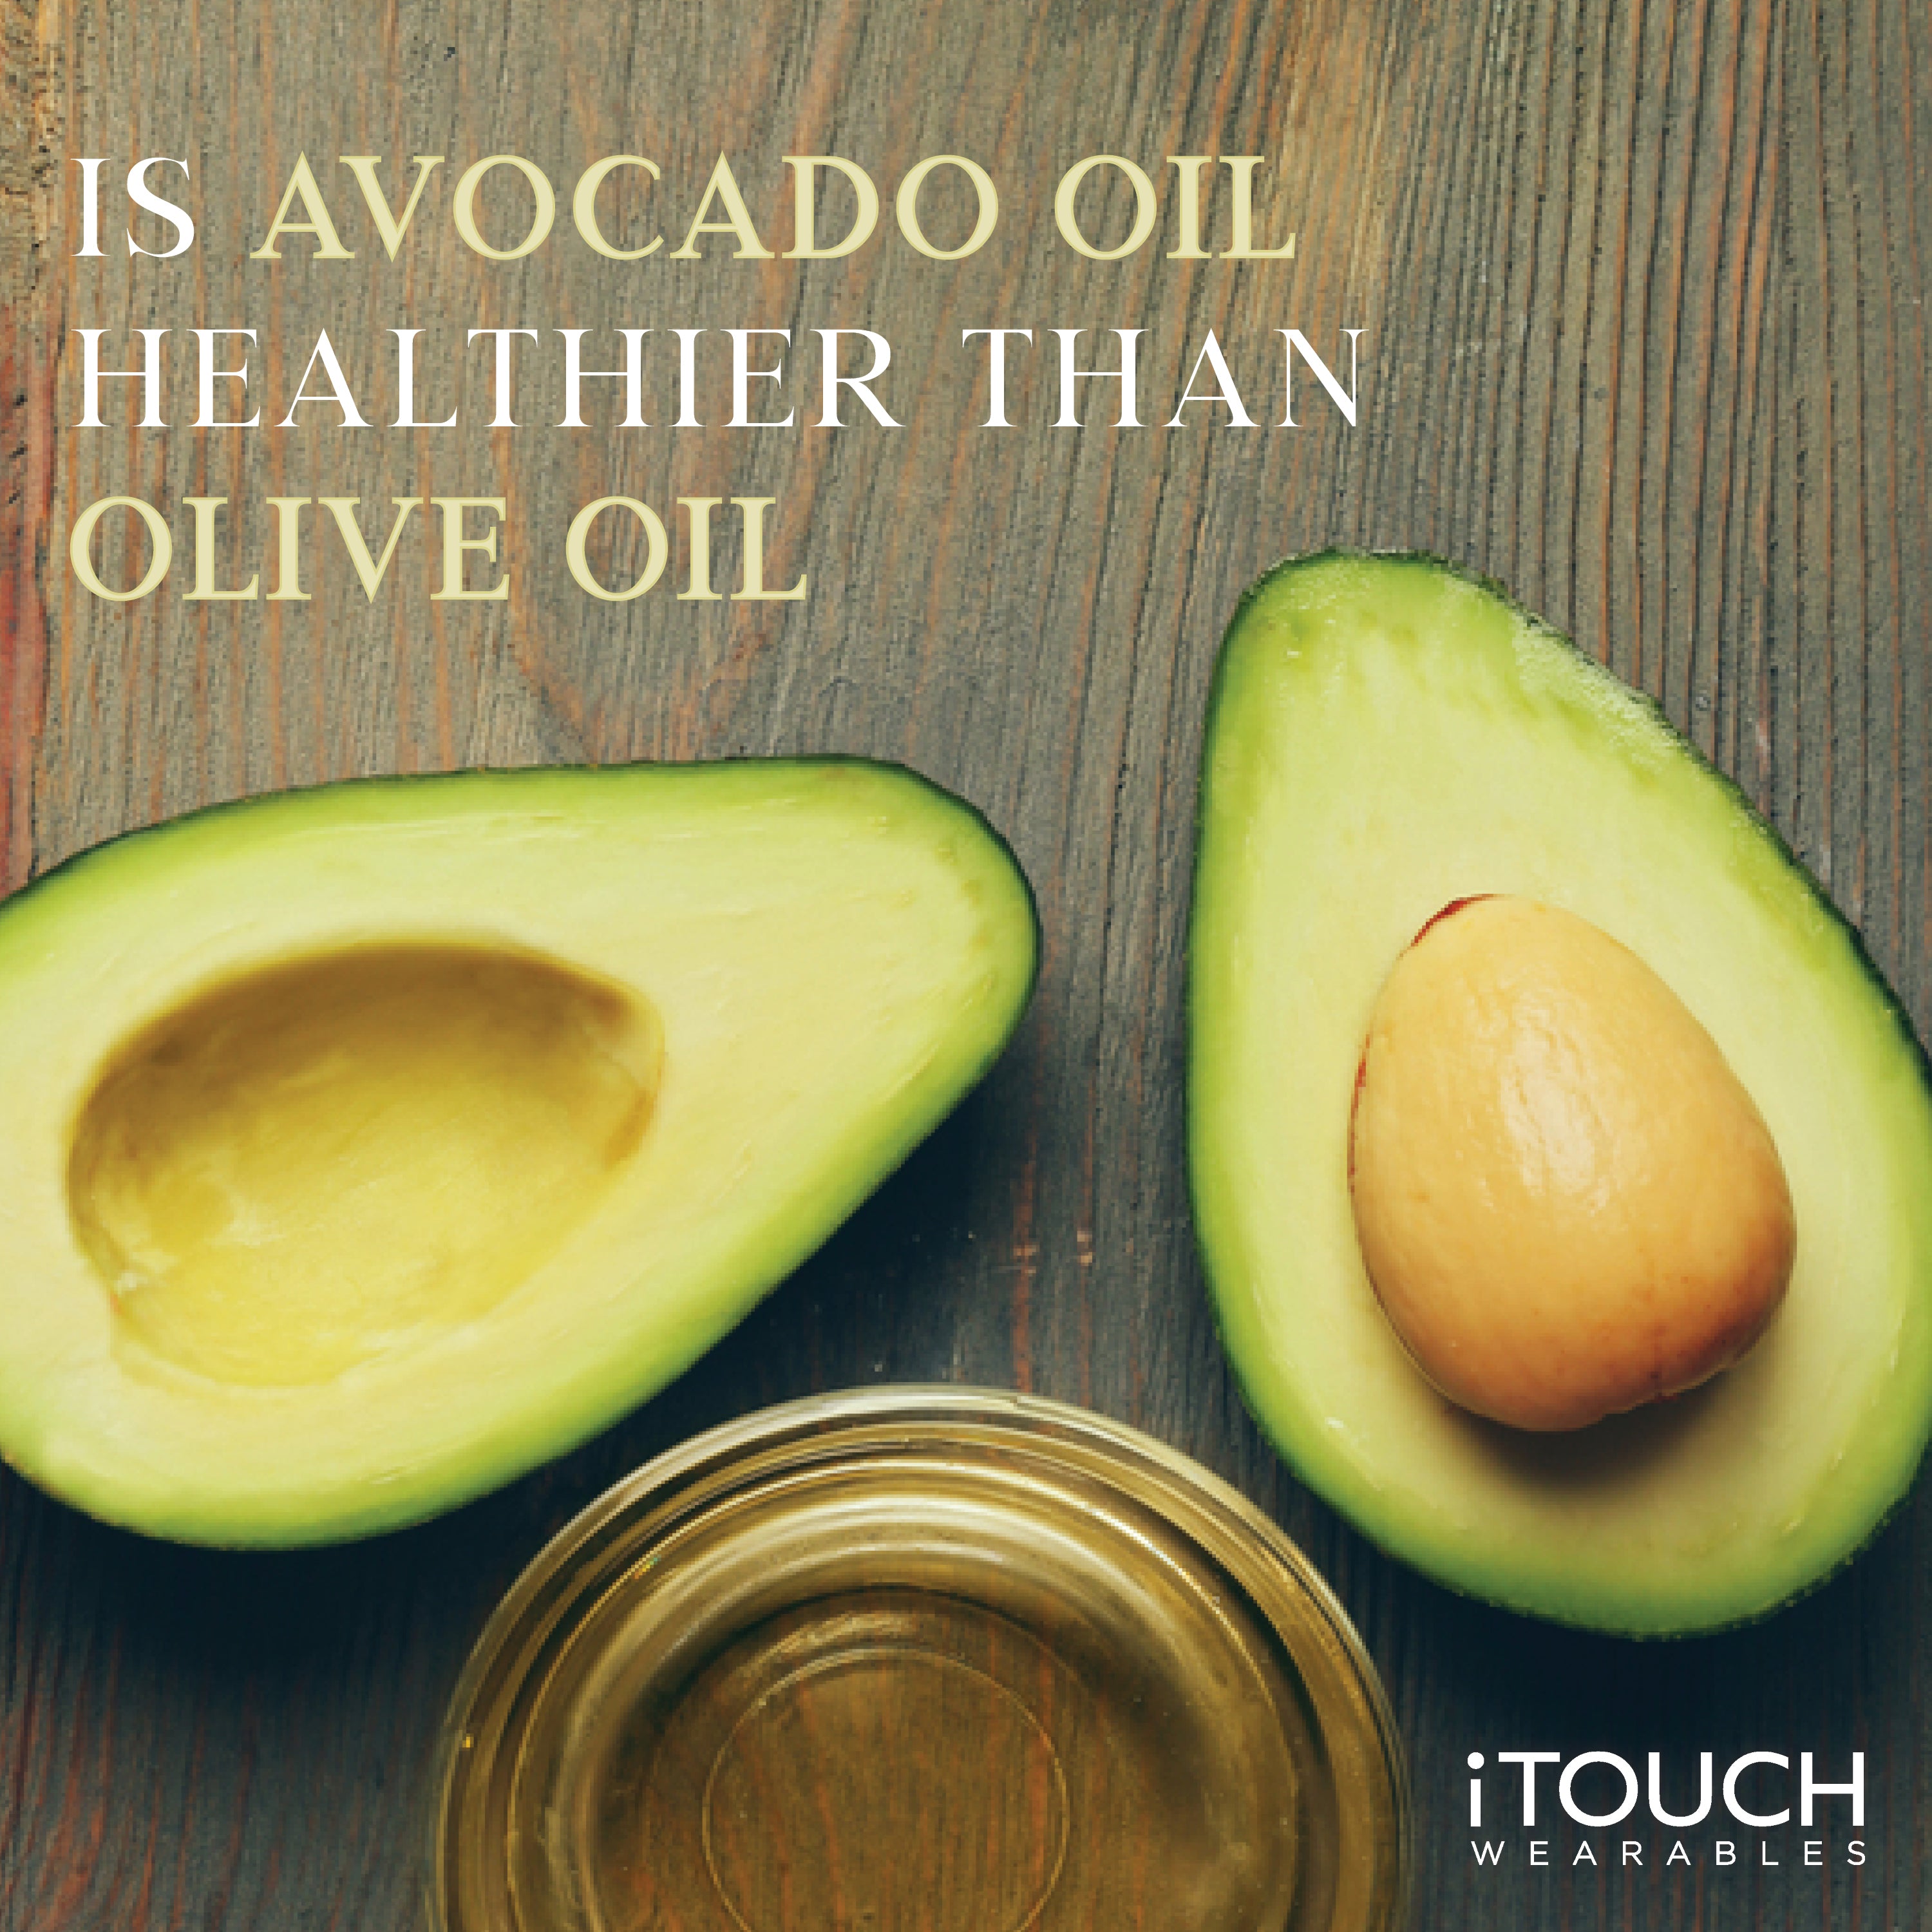 Is Avocado Oil Healthier than Olive Oil?